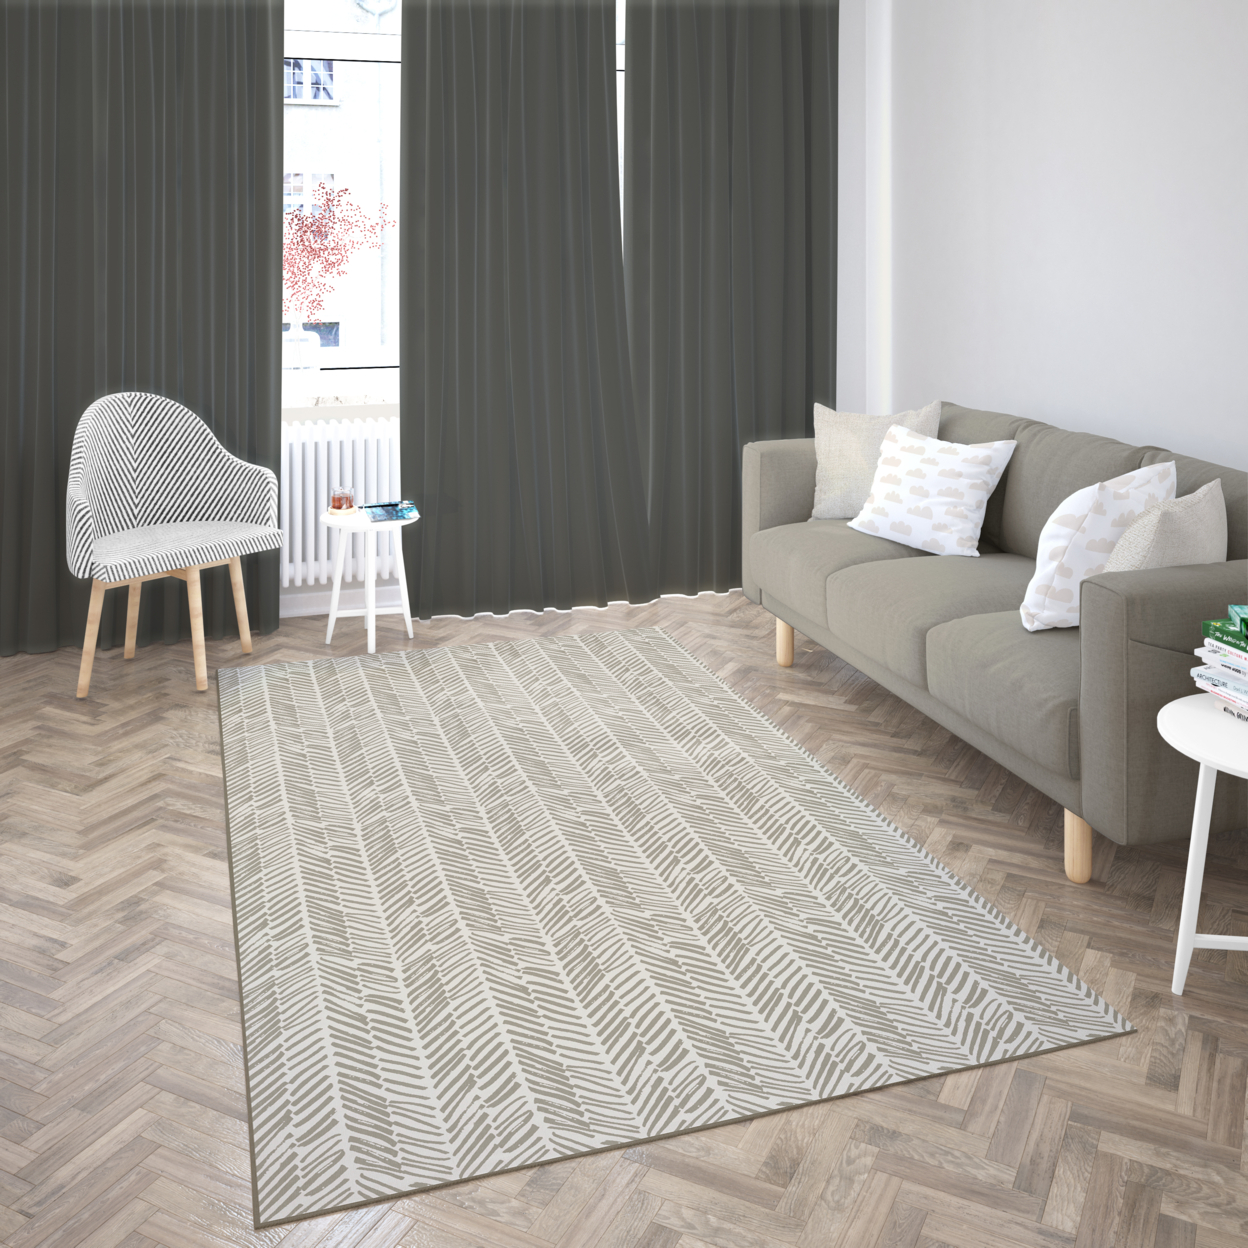 Deerlux Modern Living Room Area Rug With Nonslip Backing, Abstract Beige Chevron Strokes Pattern - 8 X 10